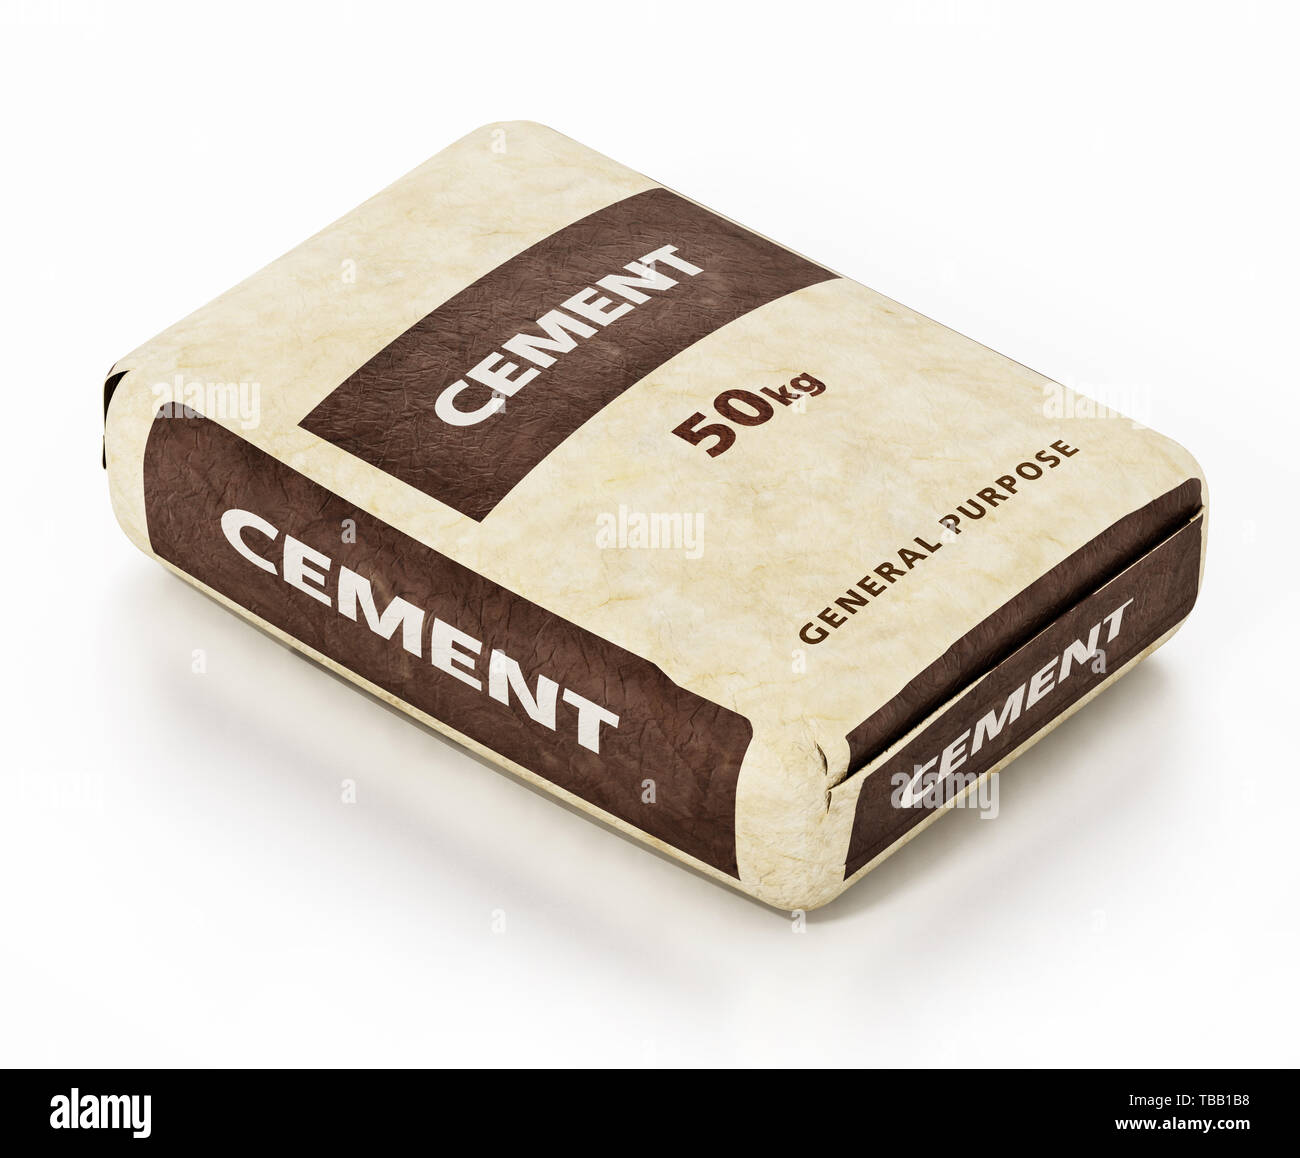 Cement bag with generic package design isolated on white background. 3D illustration. Stock Photo